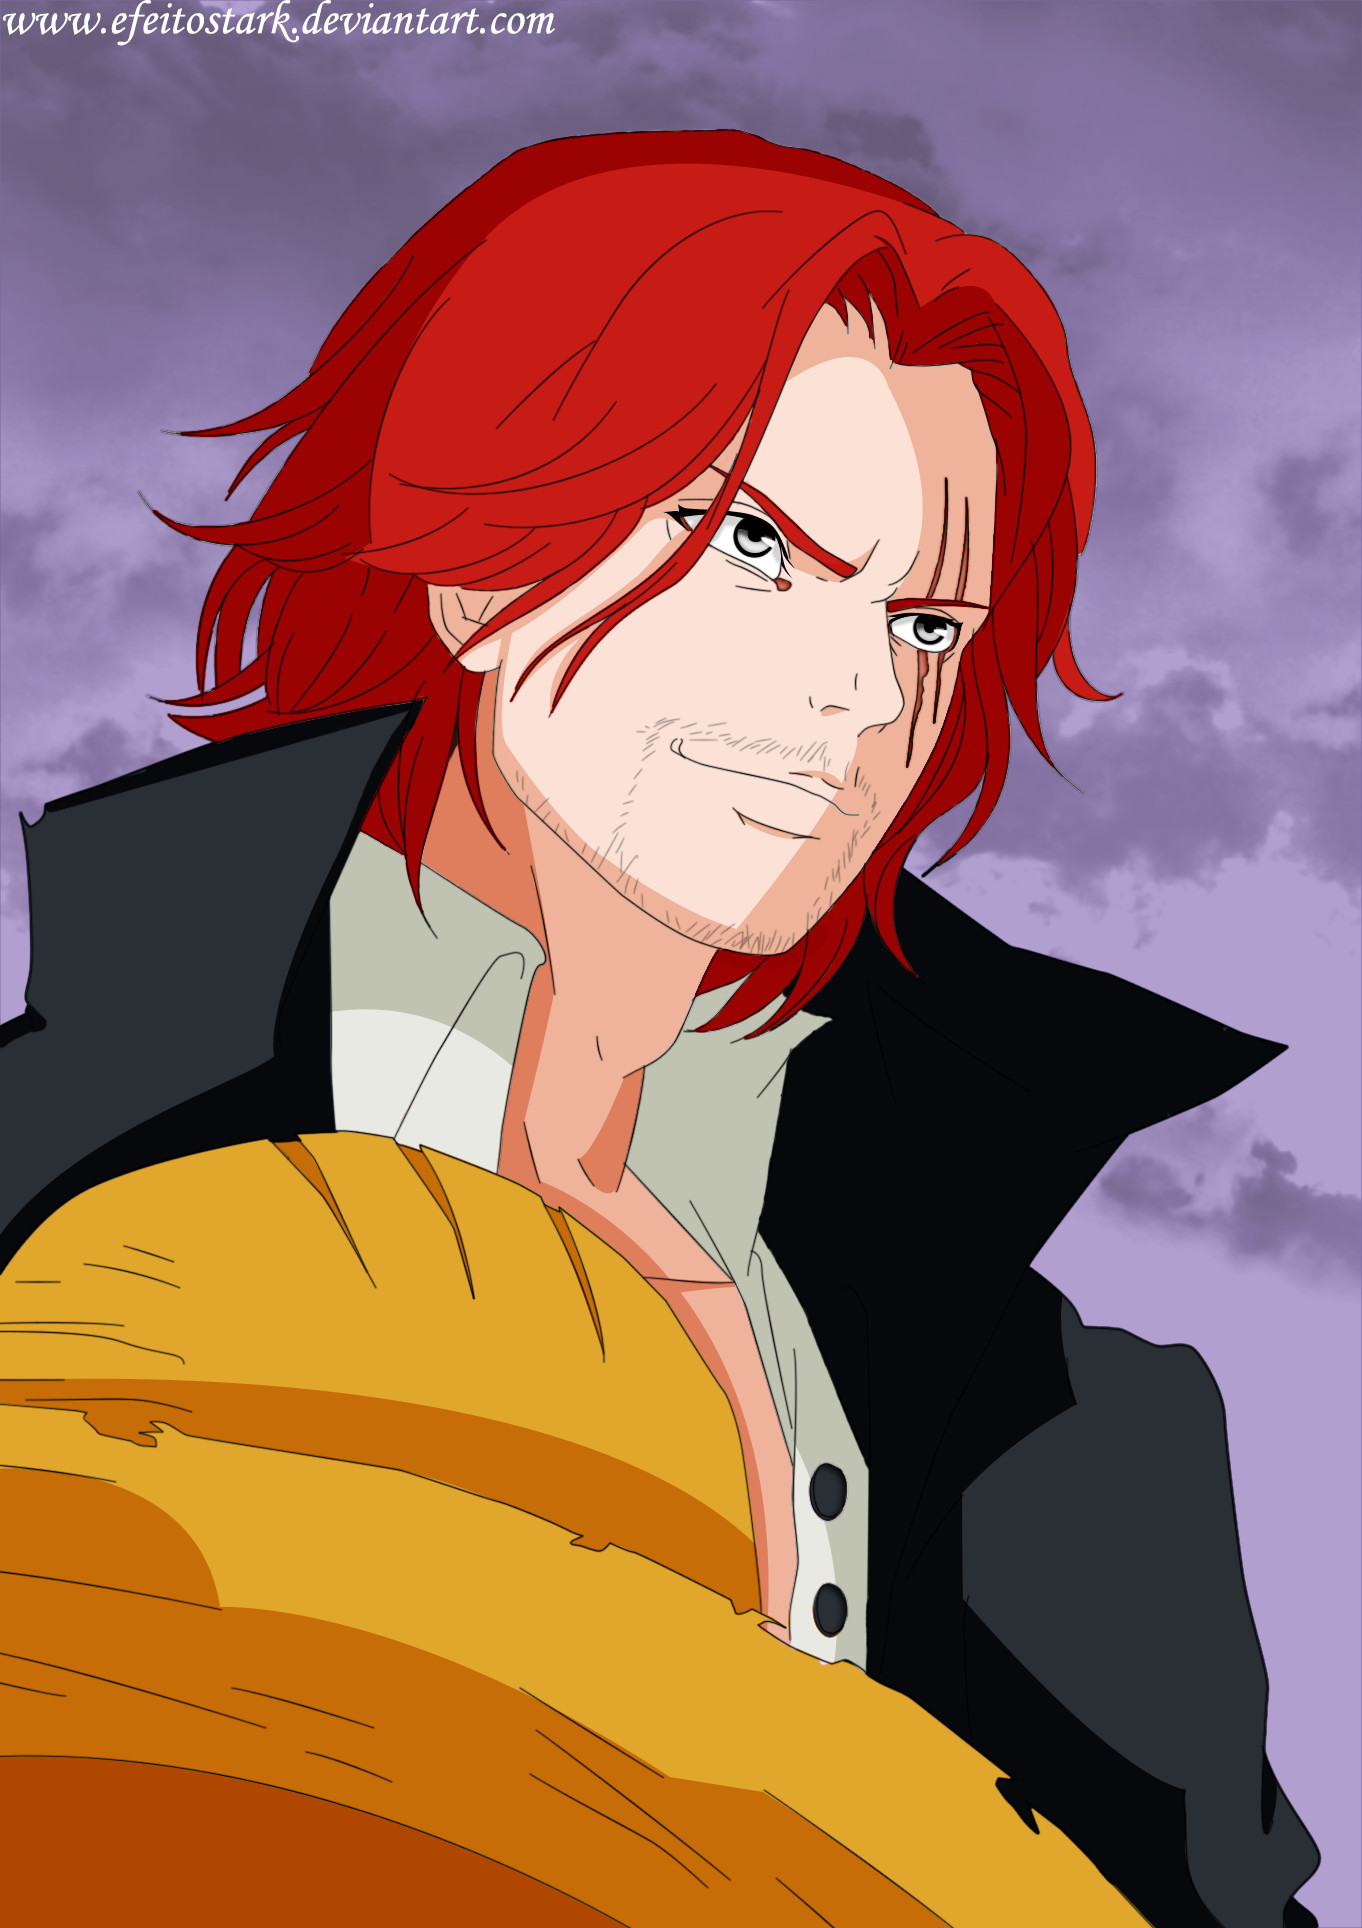 Poster One Piece Red Hair Pirates 38x52cm